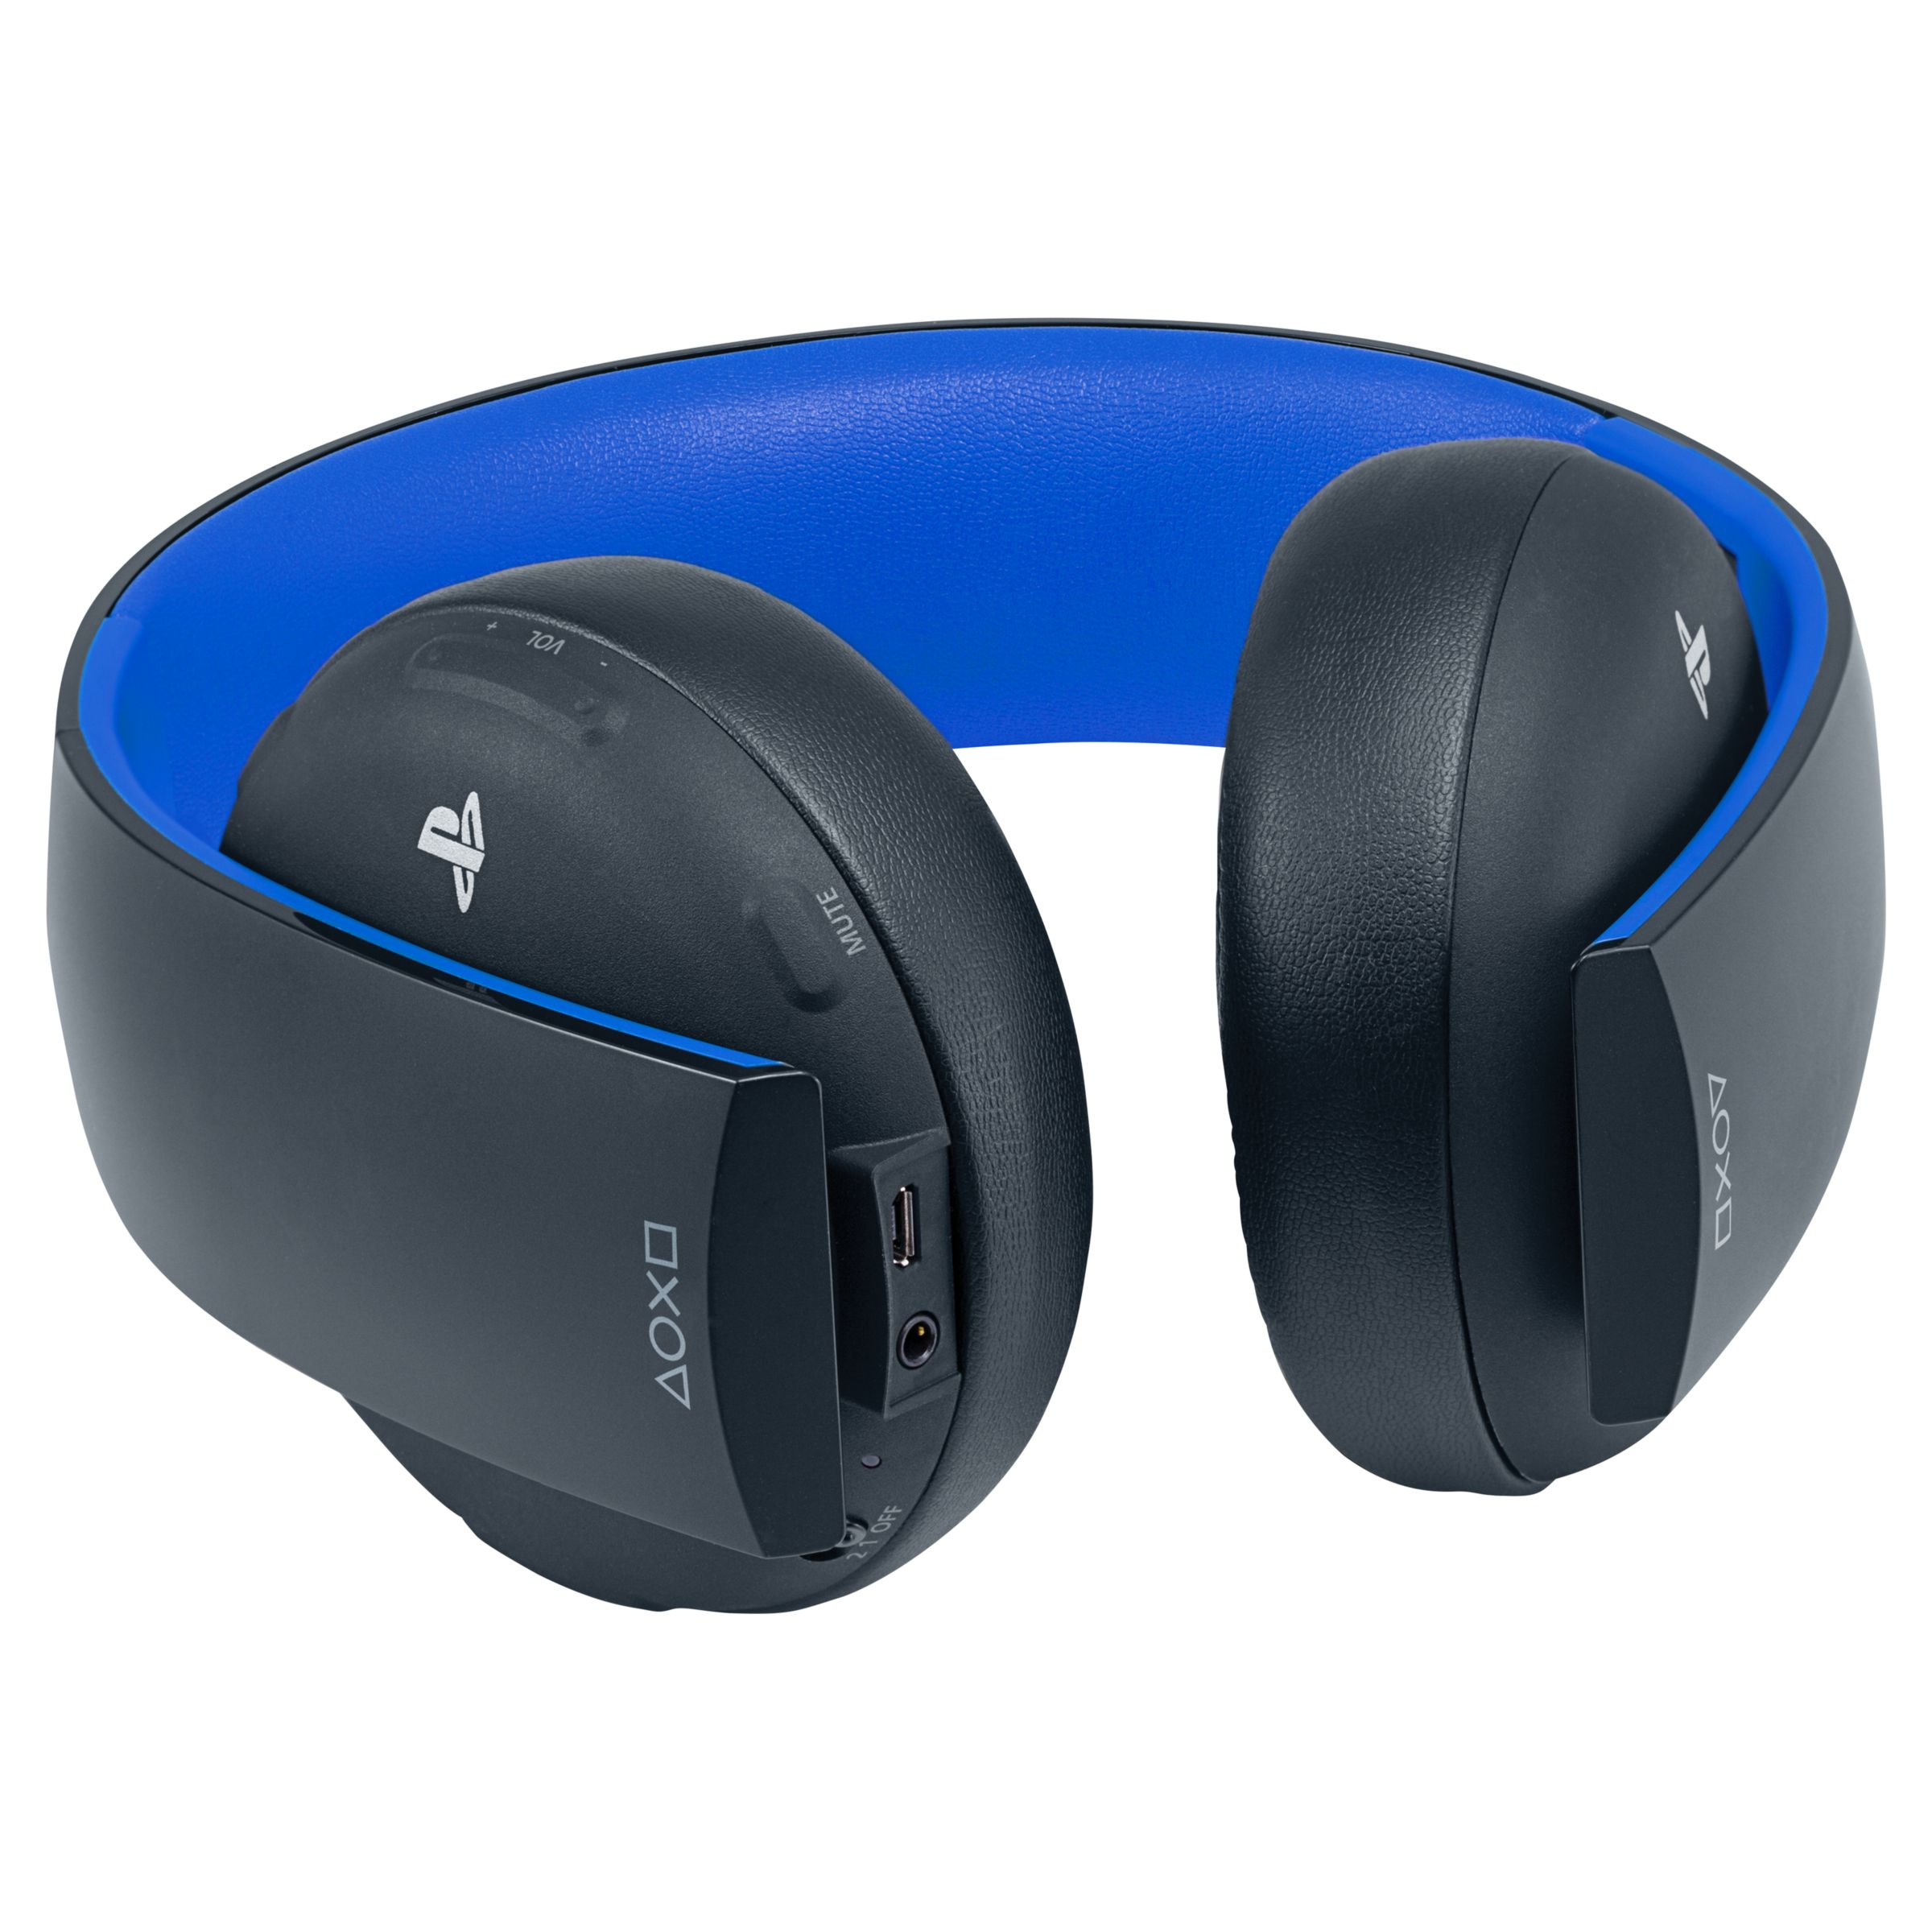 official playstation headset